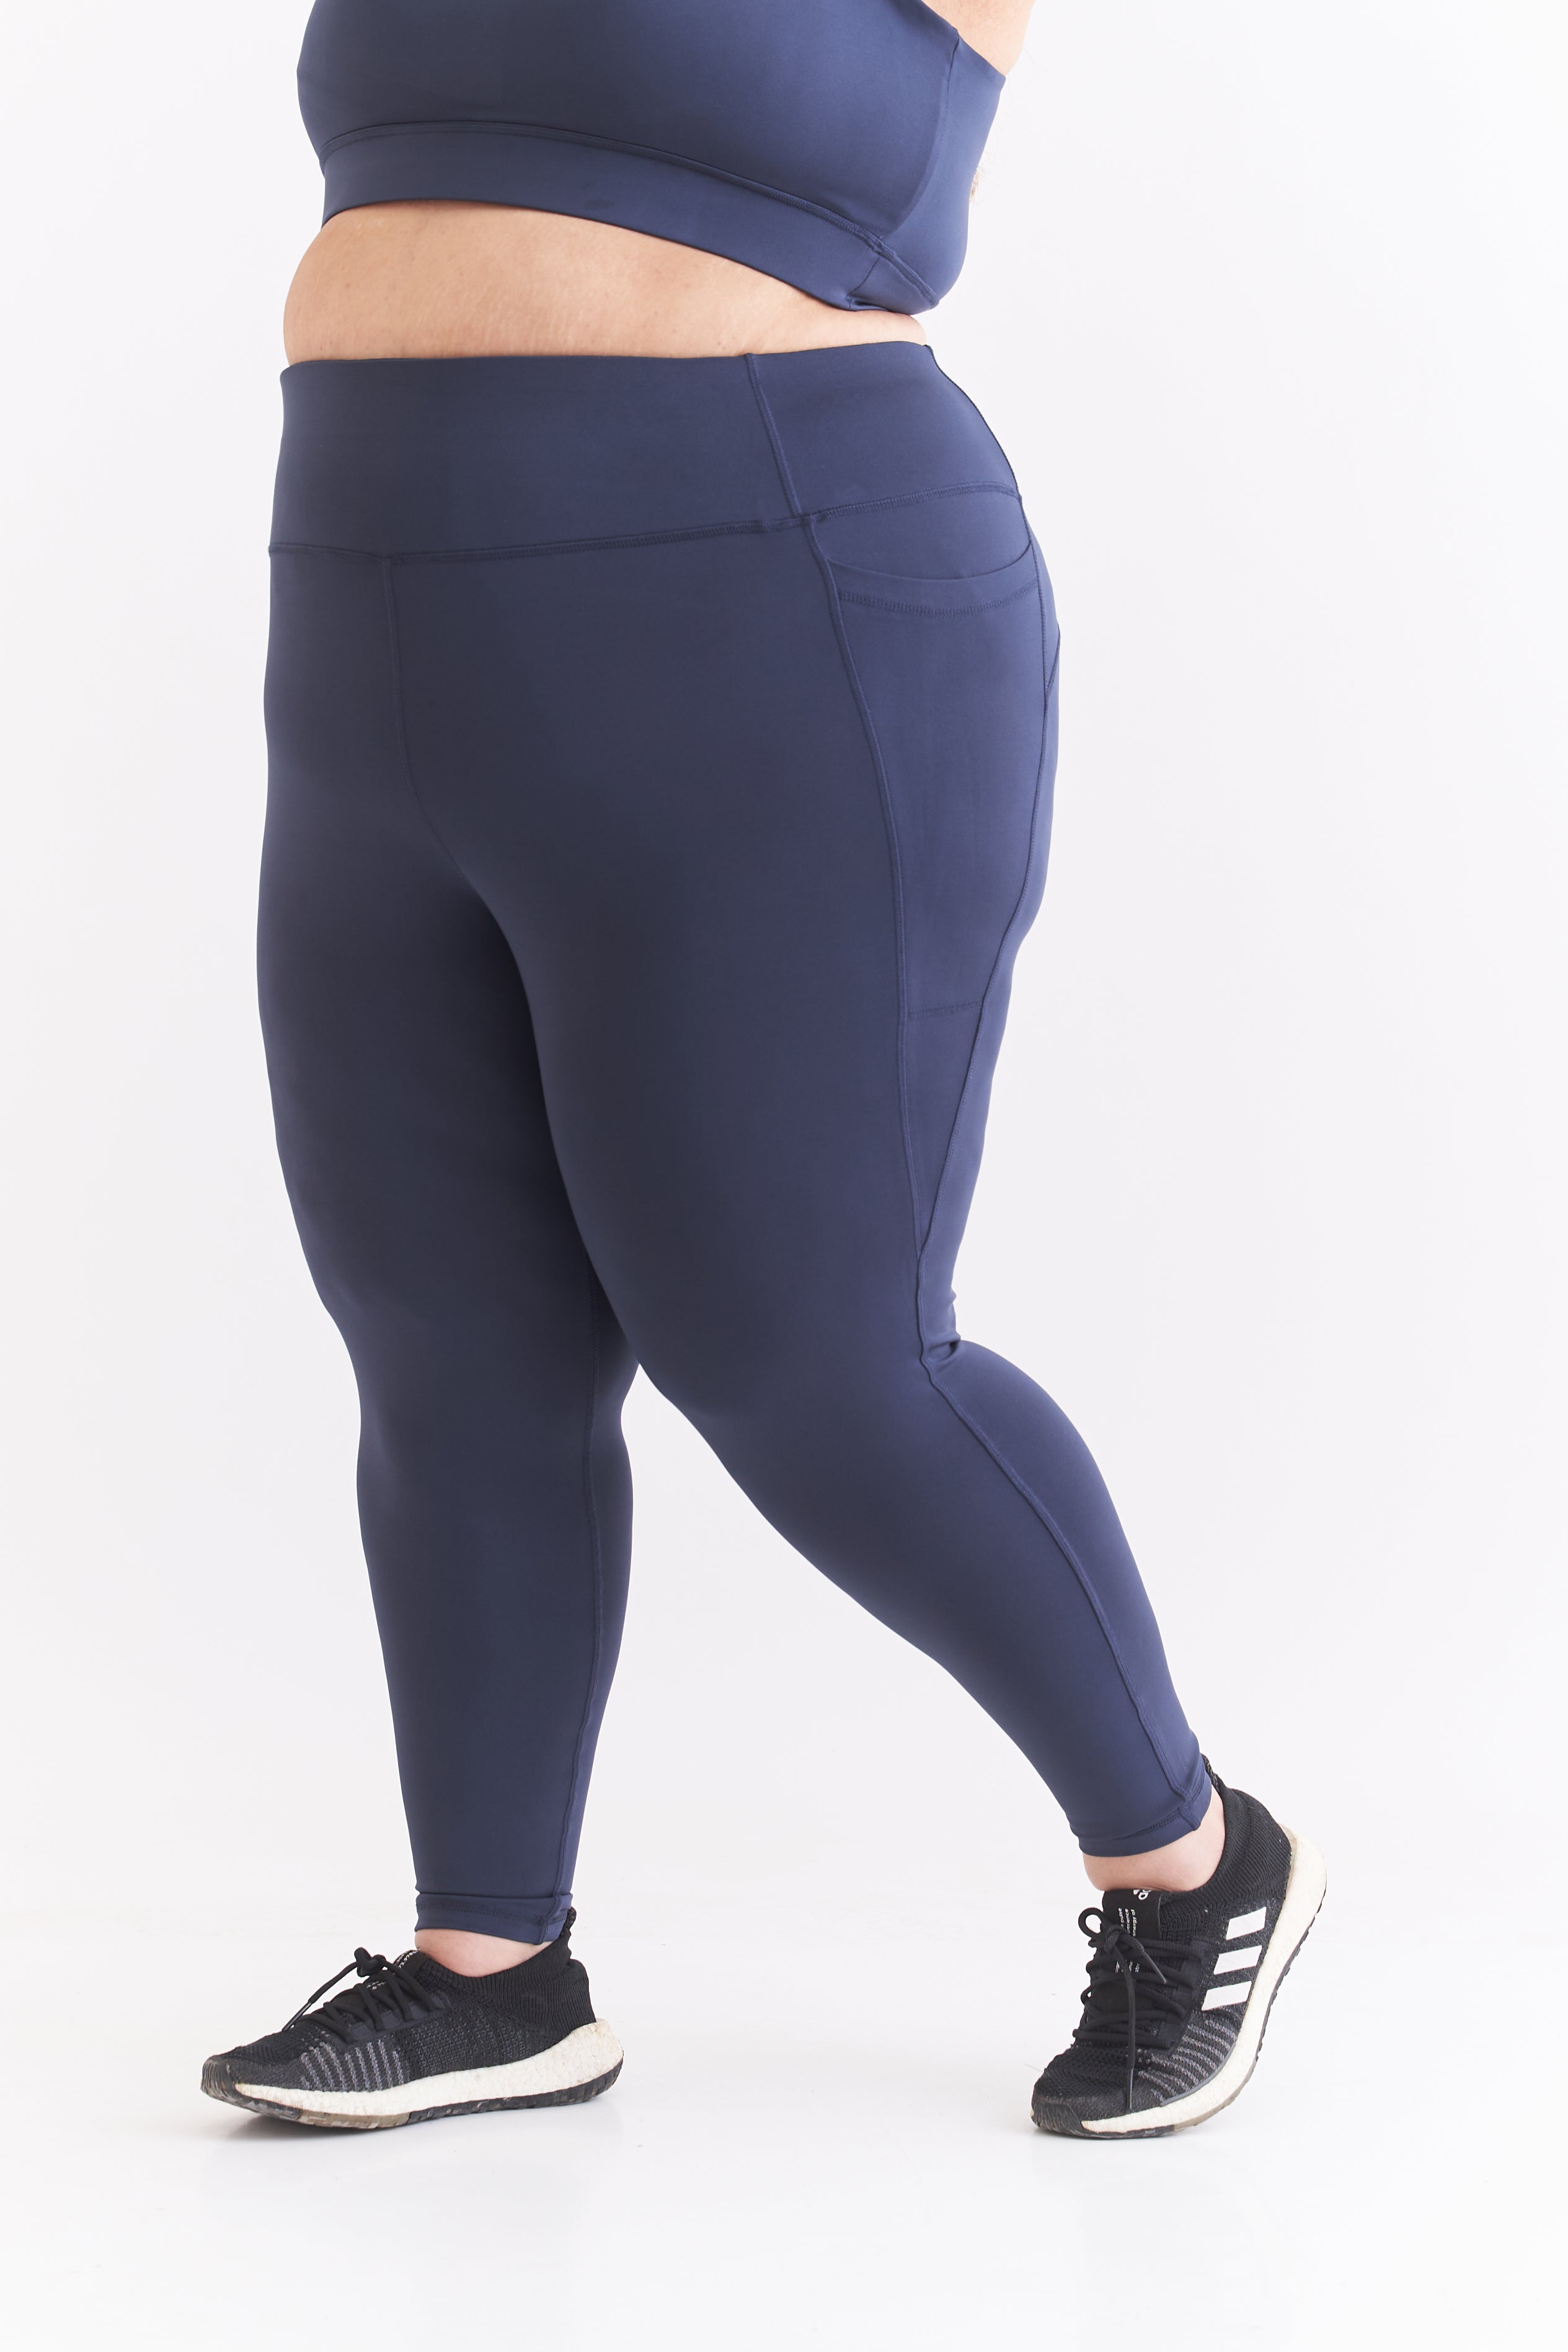 Navy Buttery Soft EXTRA PLUS SIZE Leggings 2X-4X, Gift Cards